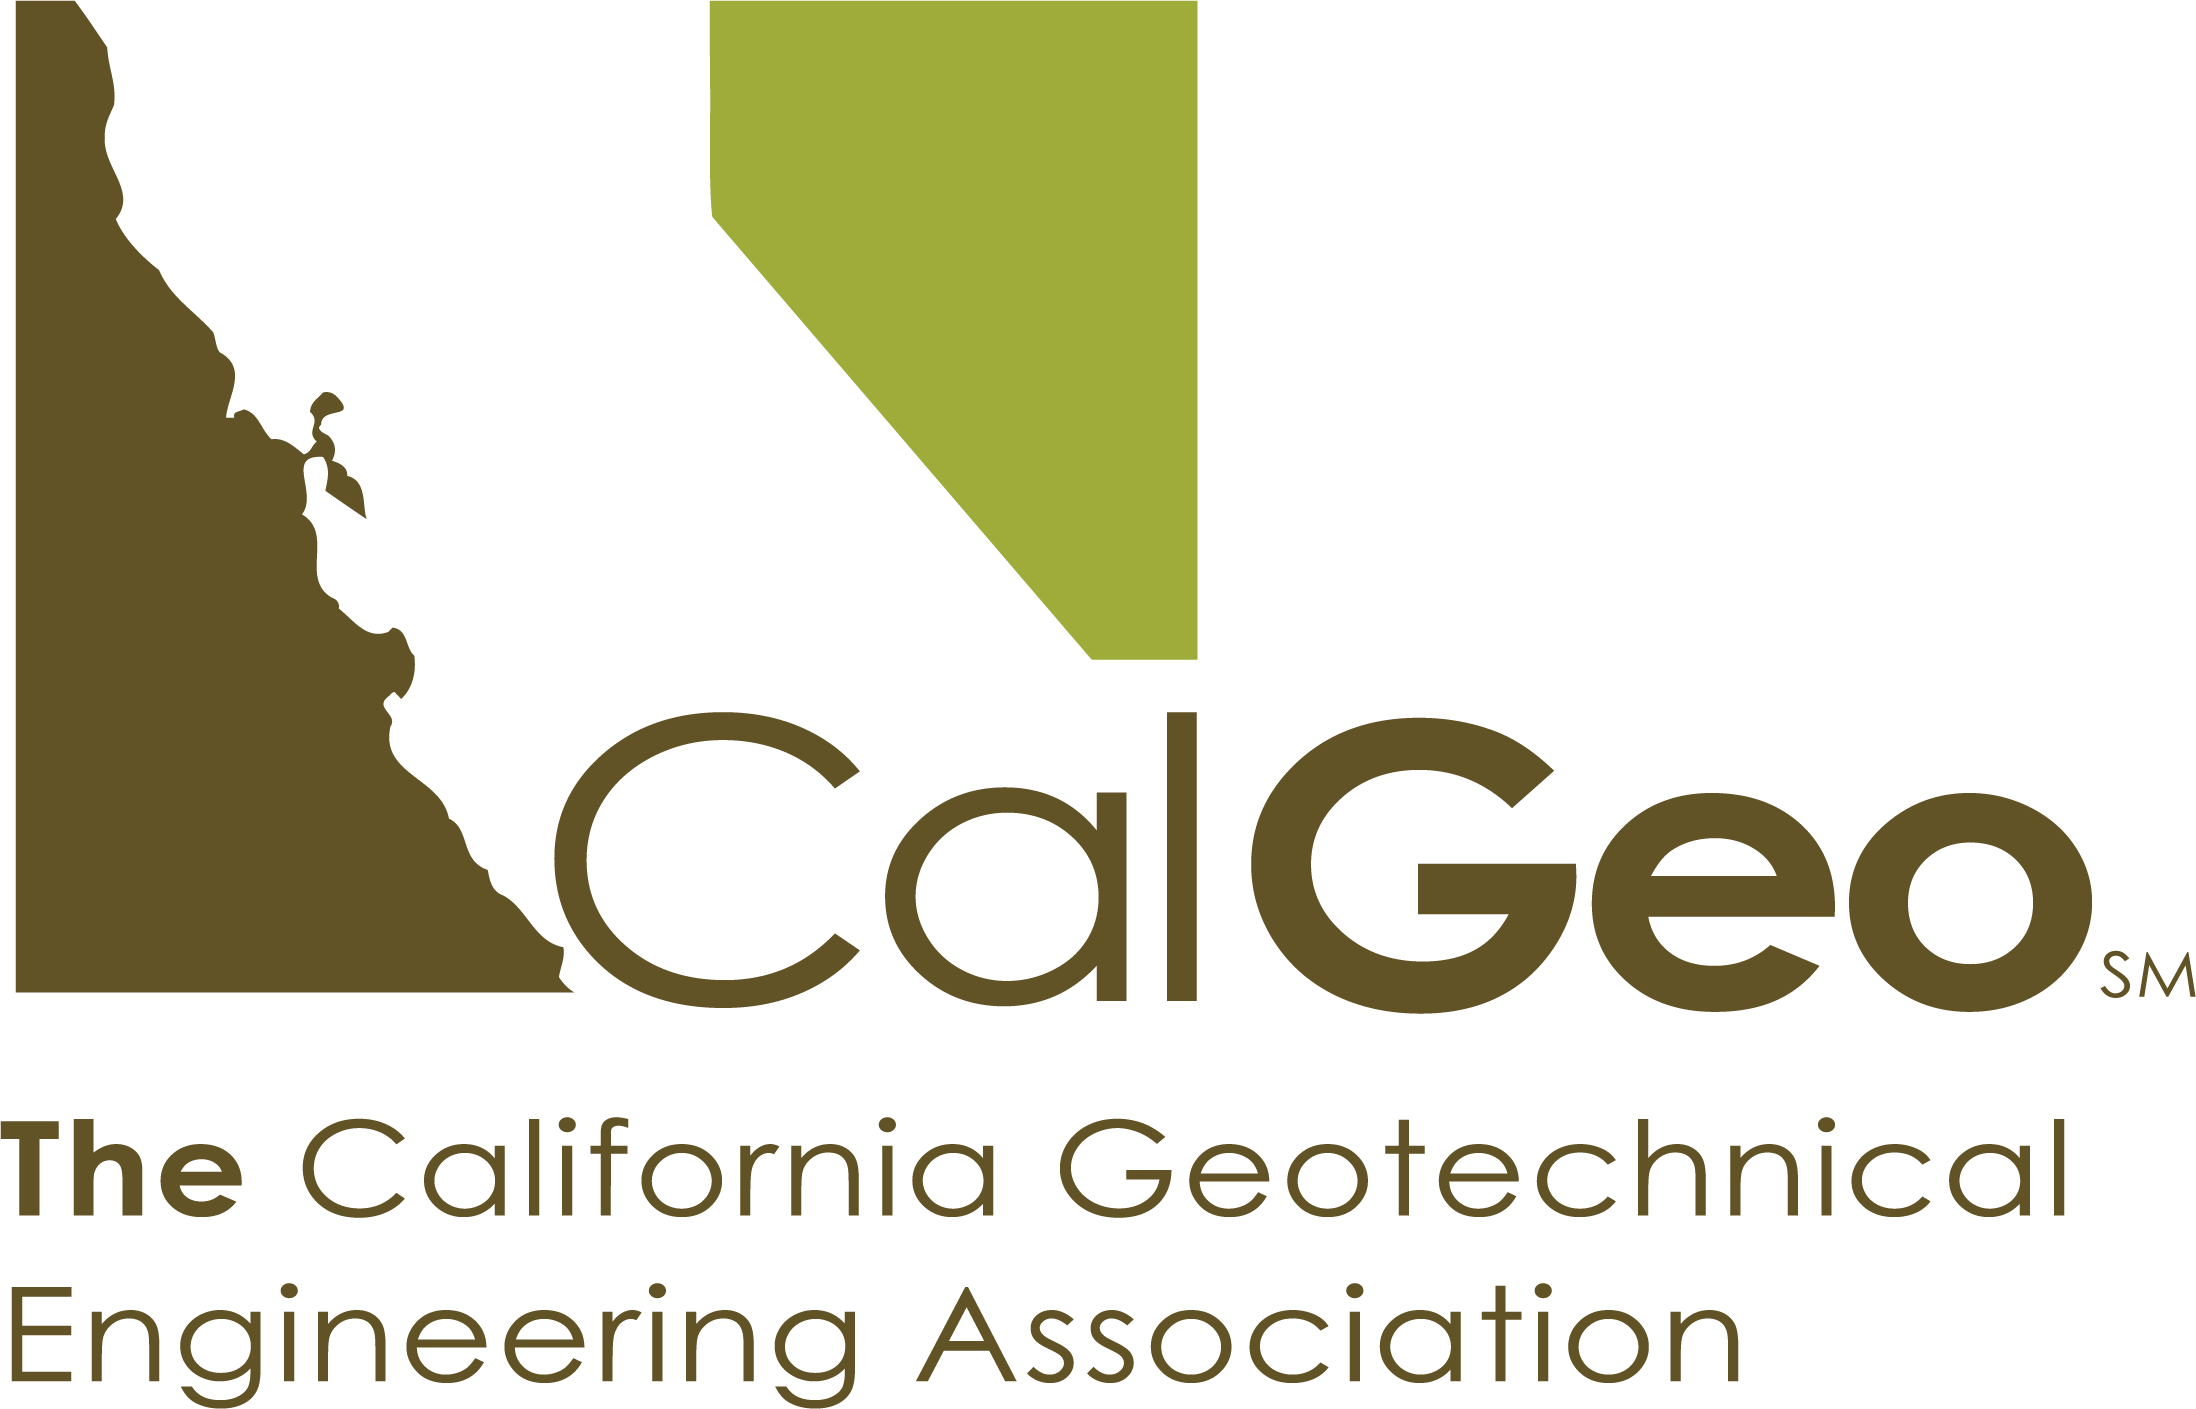 The California Geotechnical Engineering Association